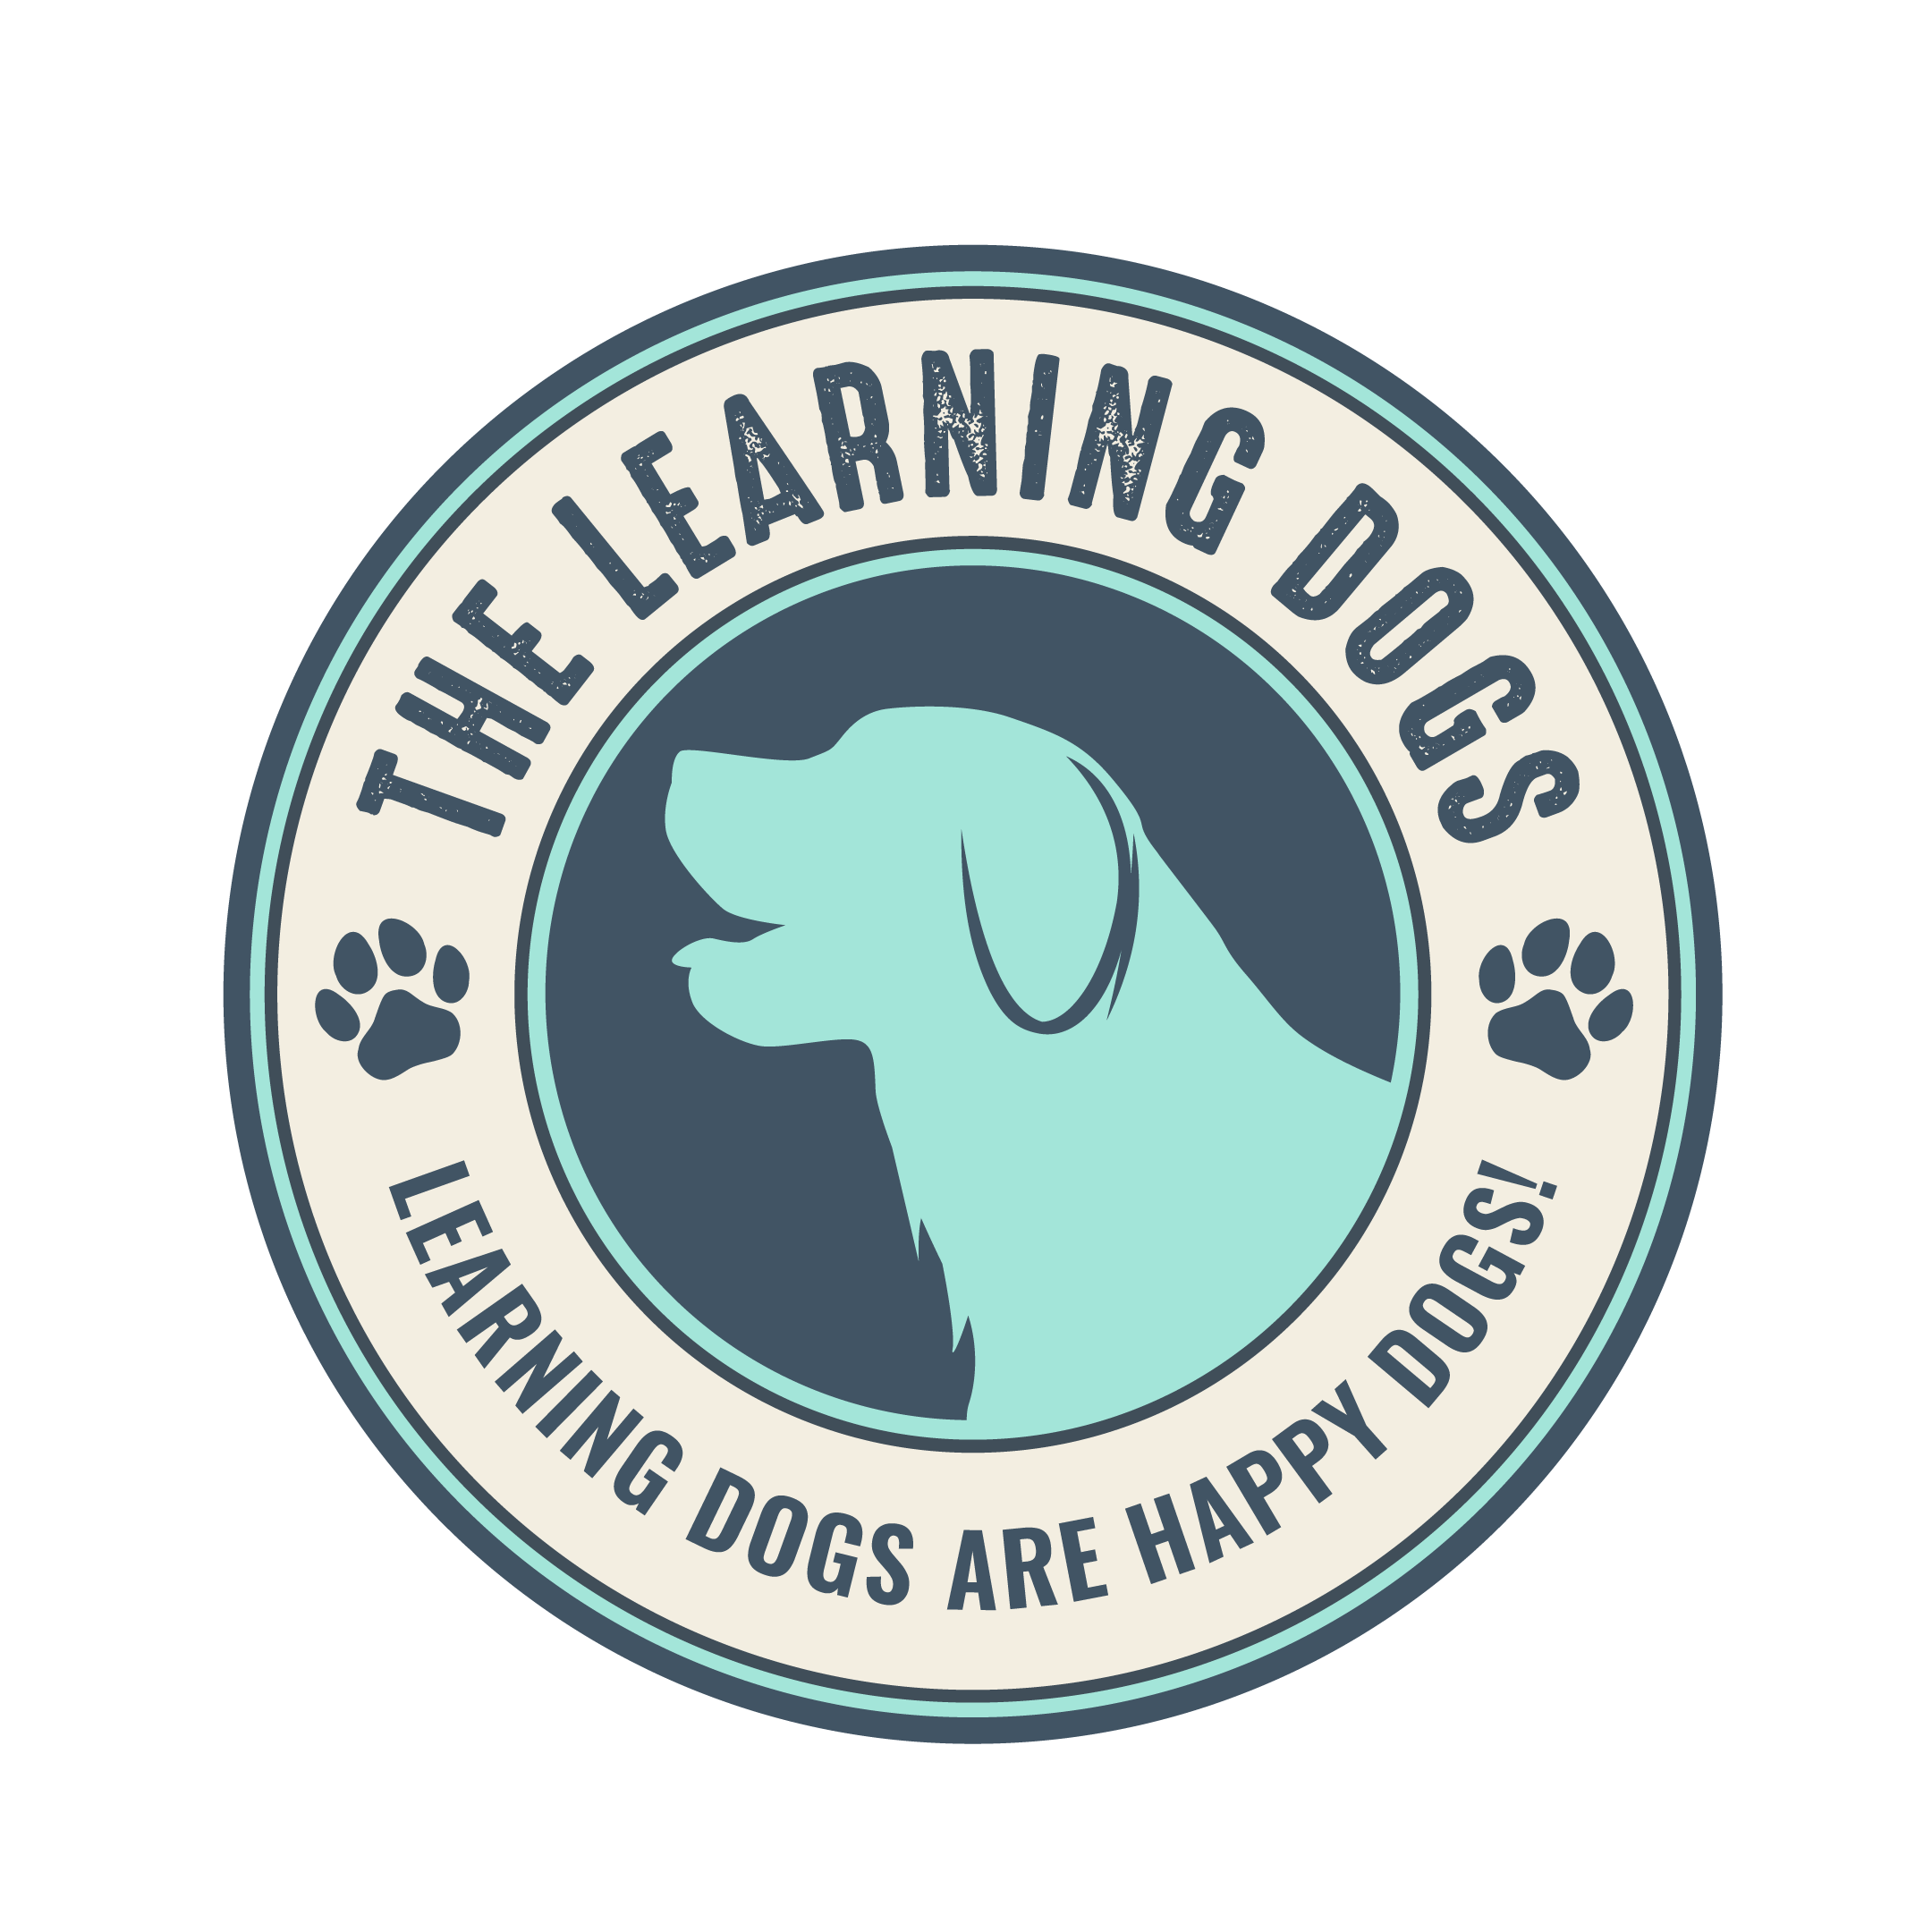 The Learning Dogs